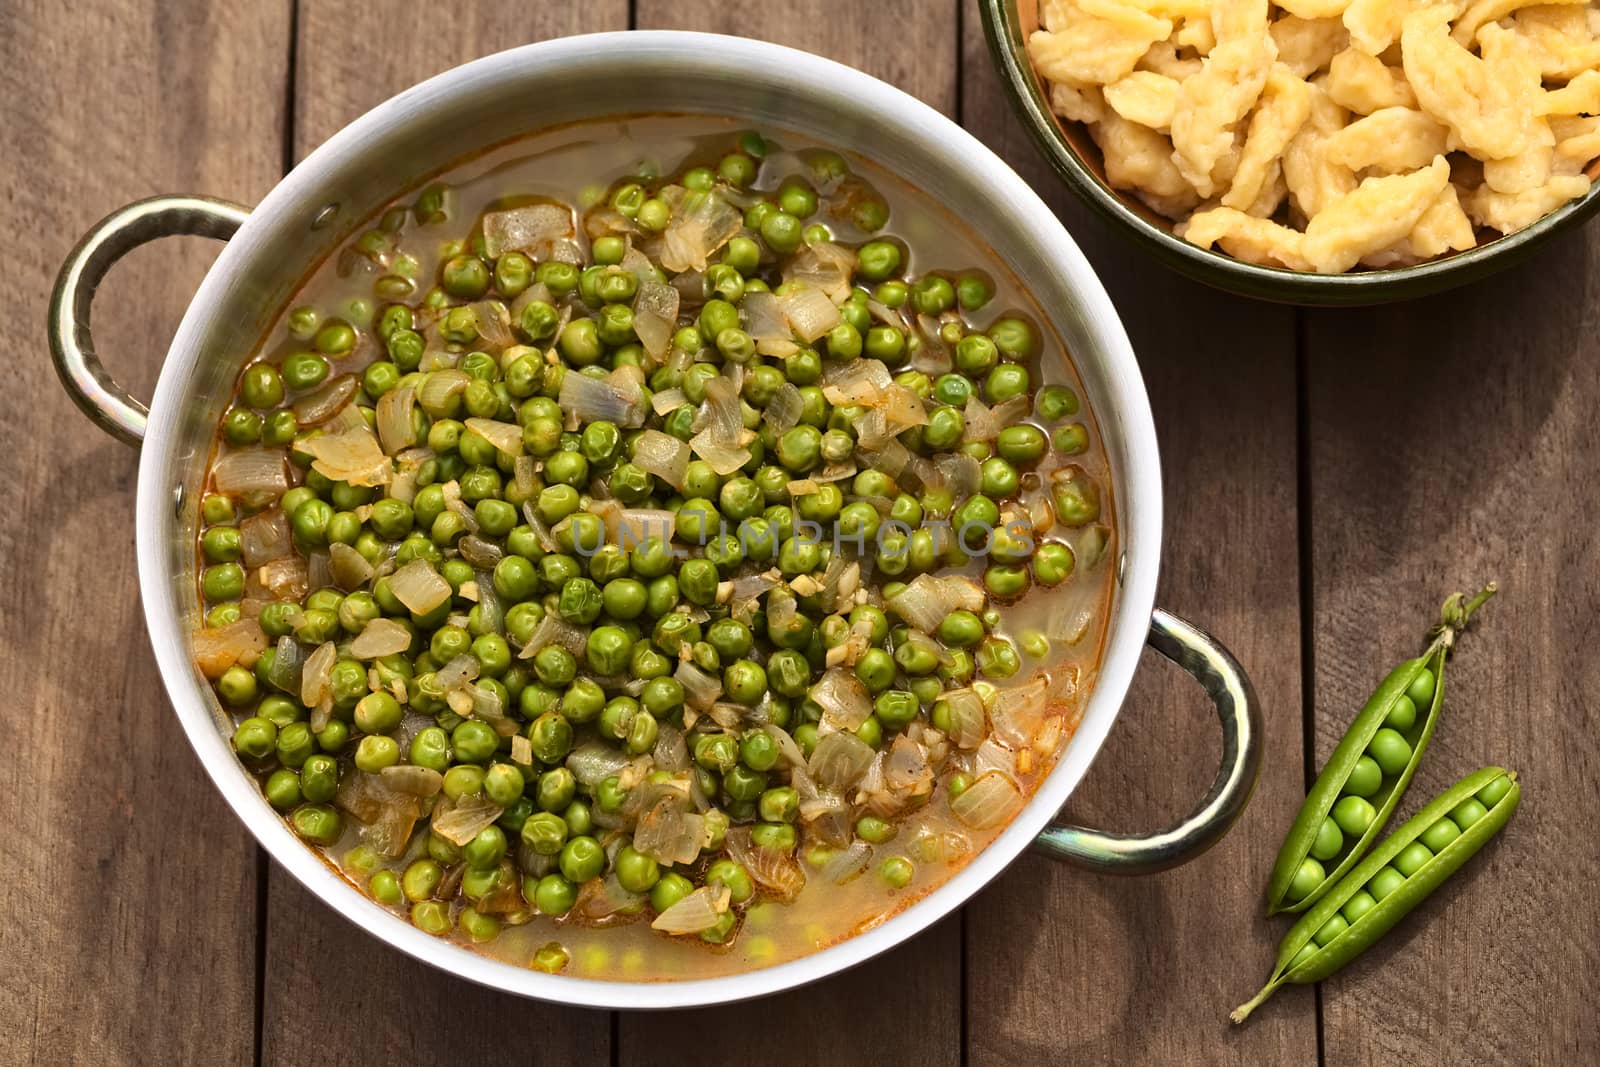 Hungarian pea stew made of onion and peas and seasoned with paprika and salt, served usually with Hungarian galuska or nokedli (homemade noodles) (Selective Focus, Focus on the middle and lower part of the stew)